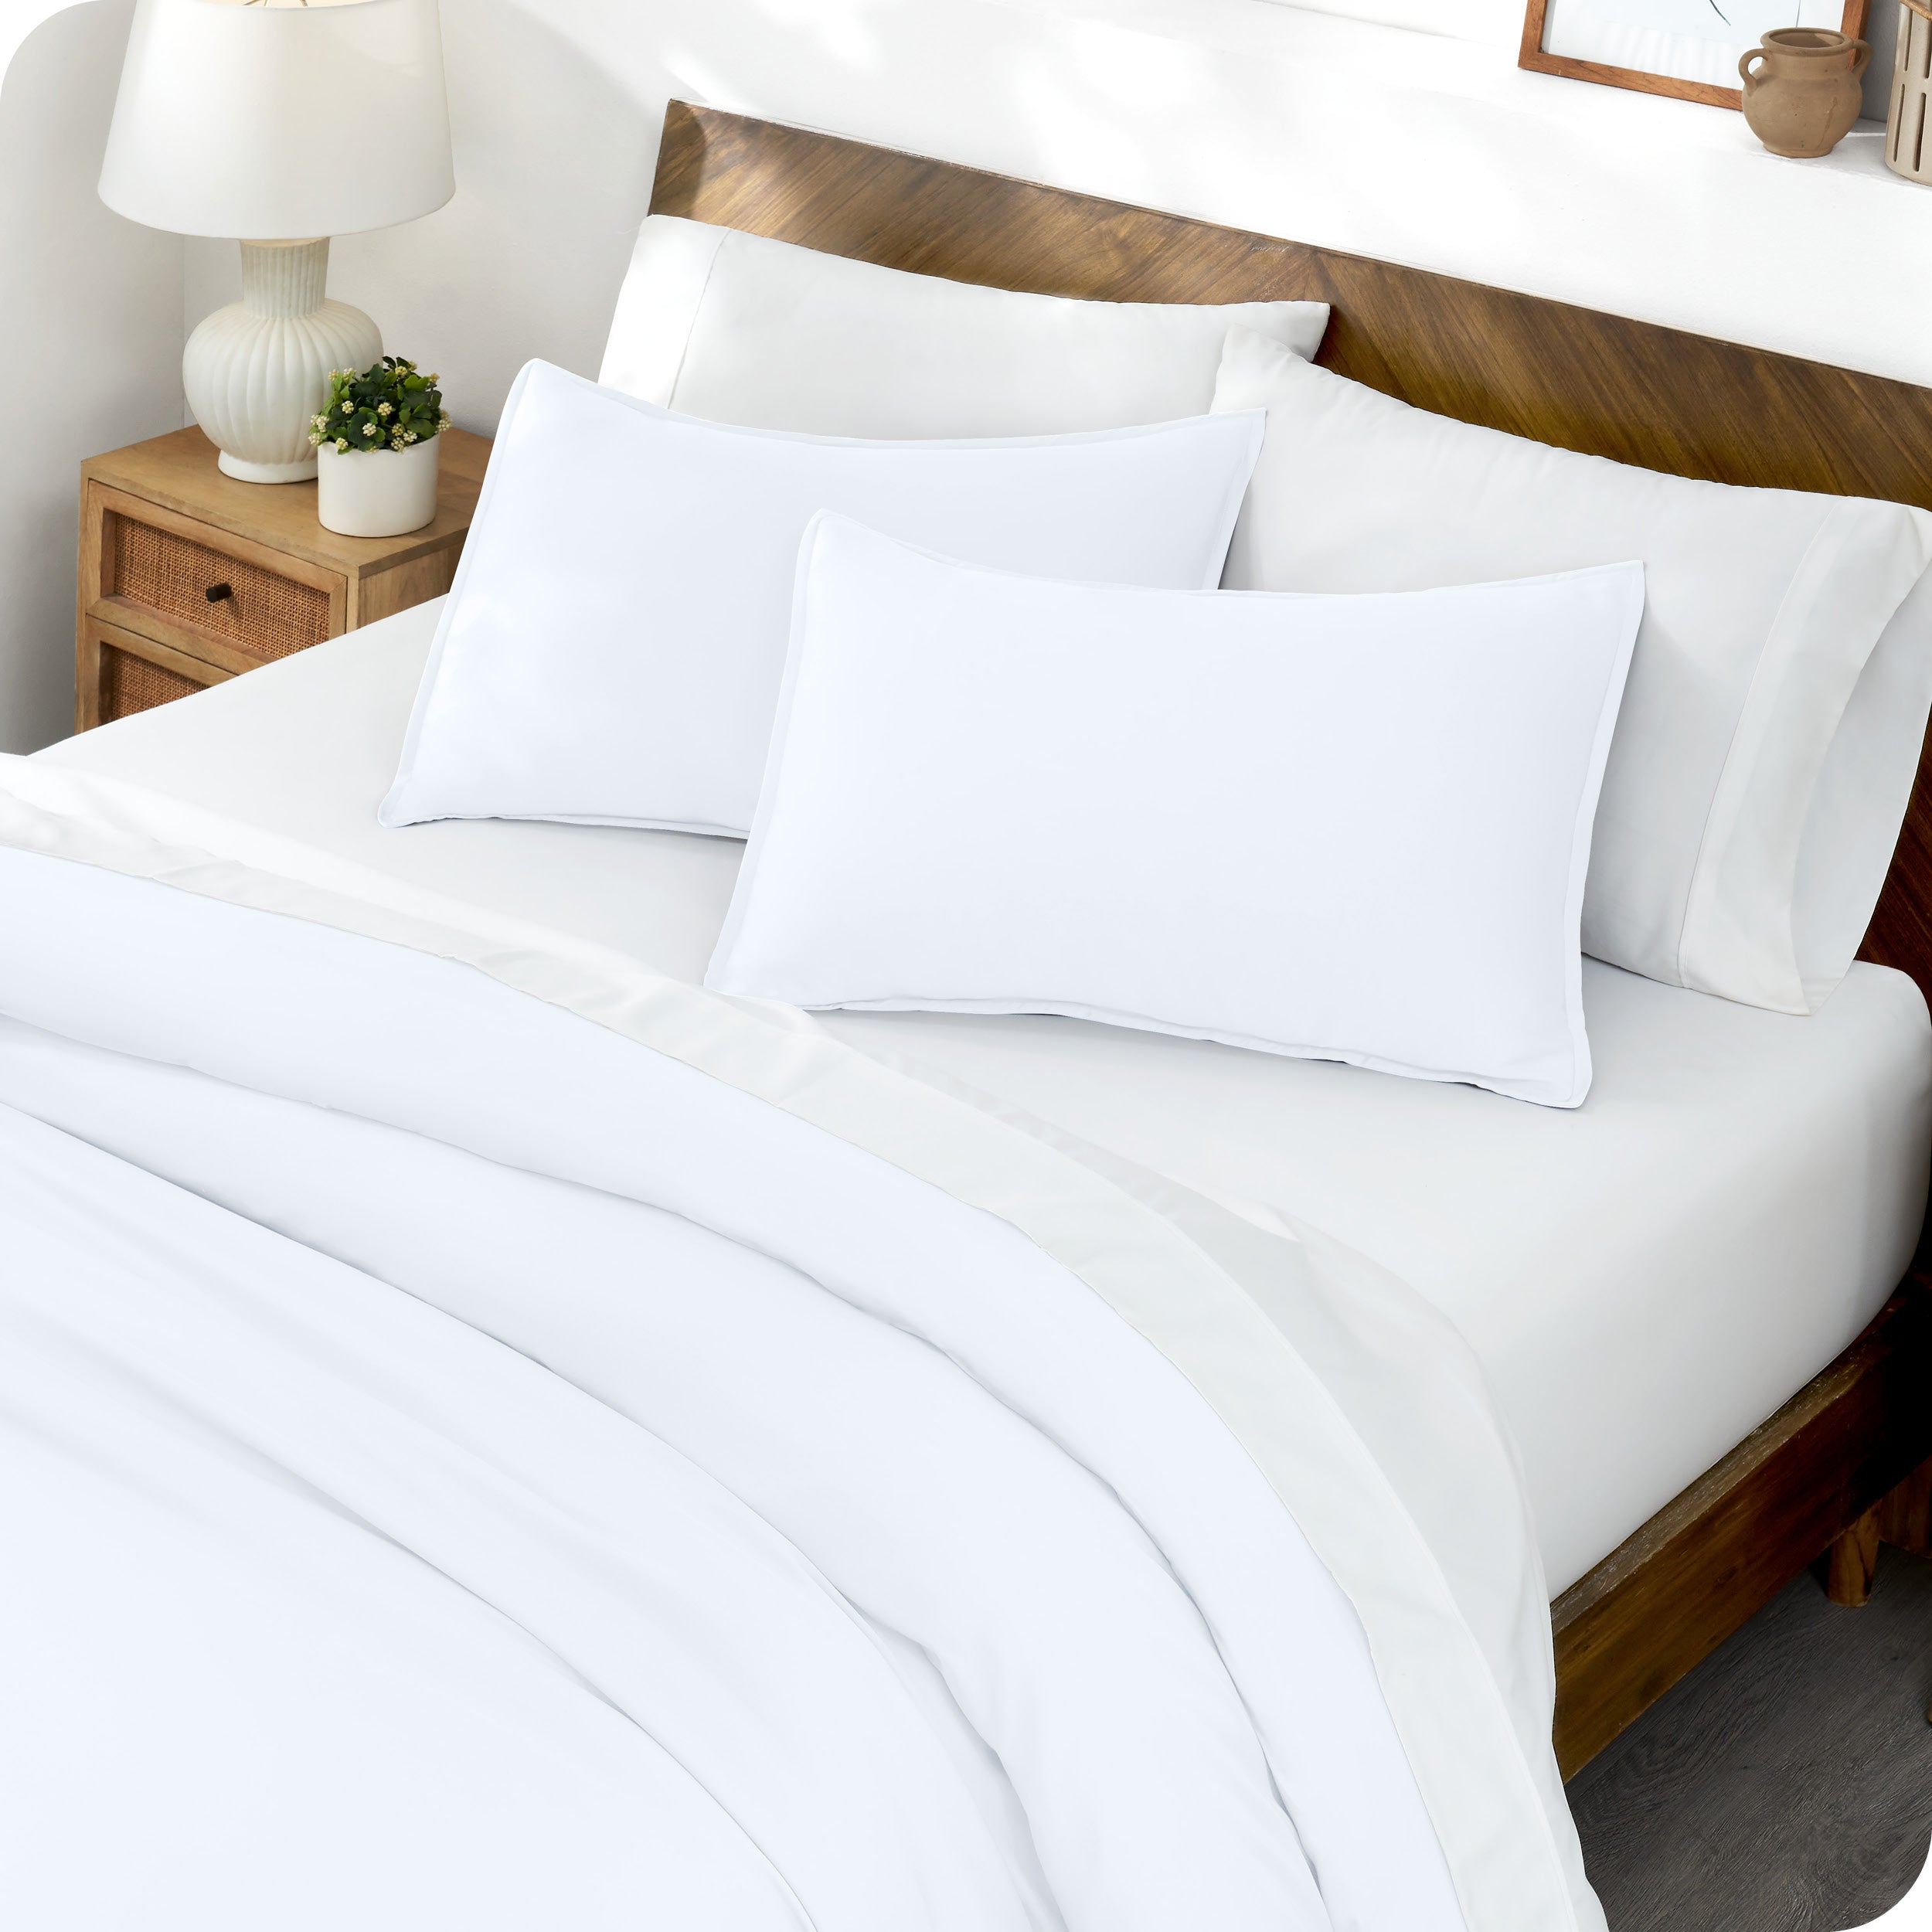 Matching TENCEL™ duvet cover and pillow shams on a bed